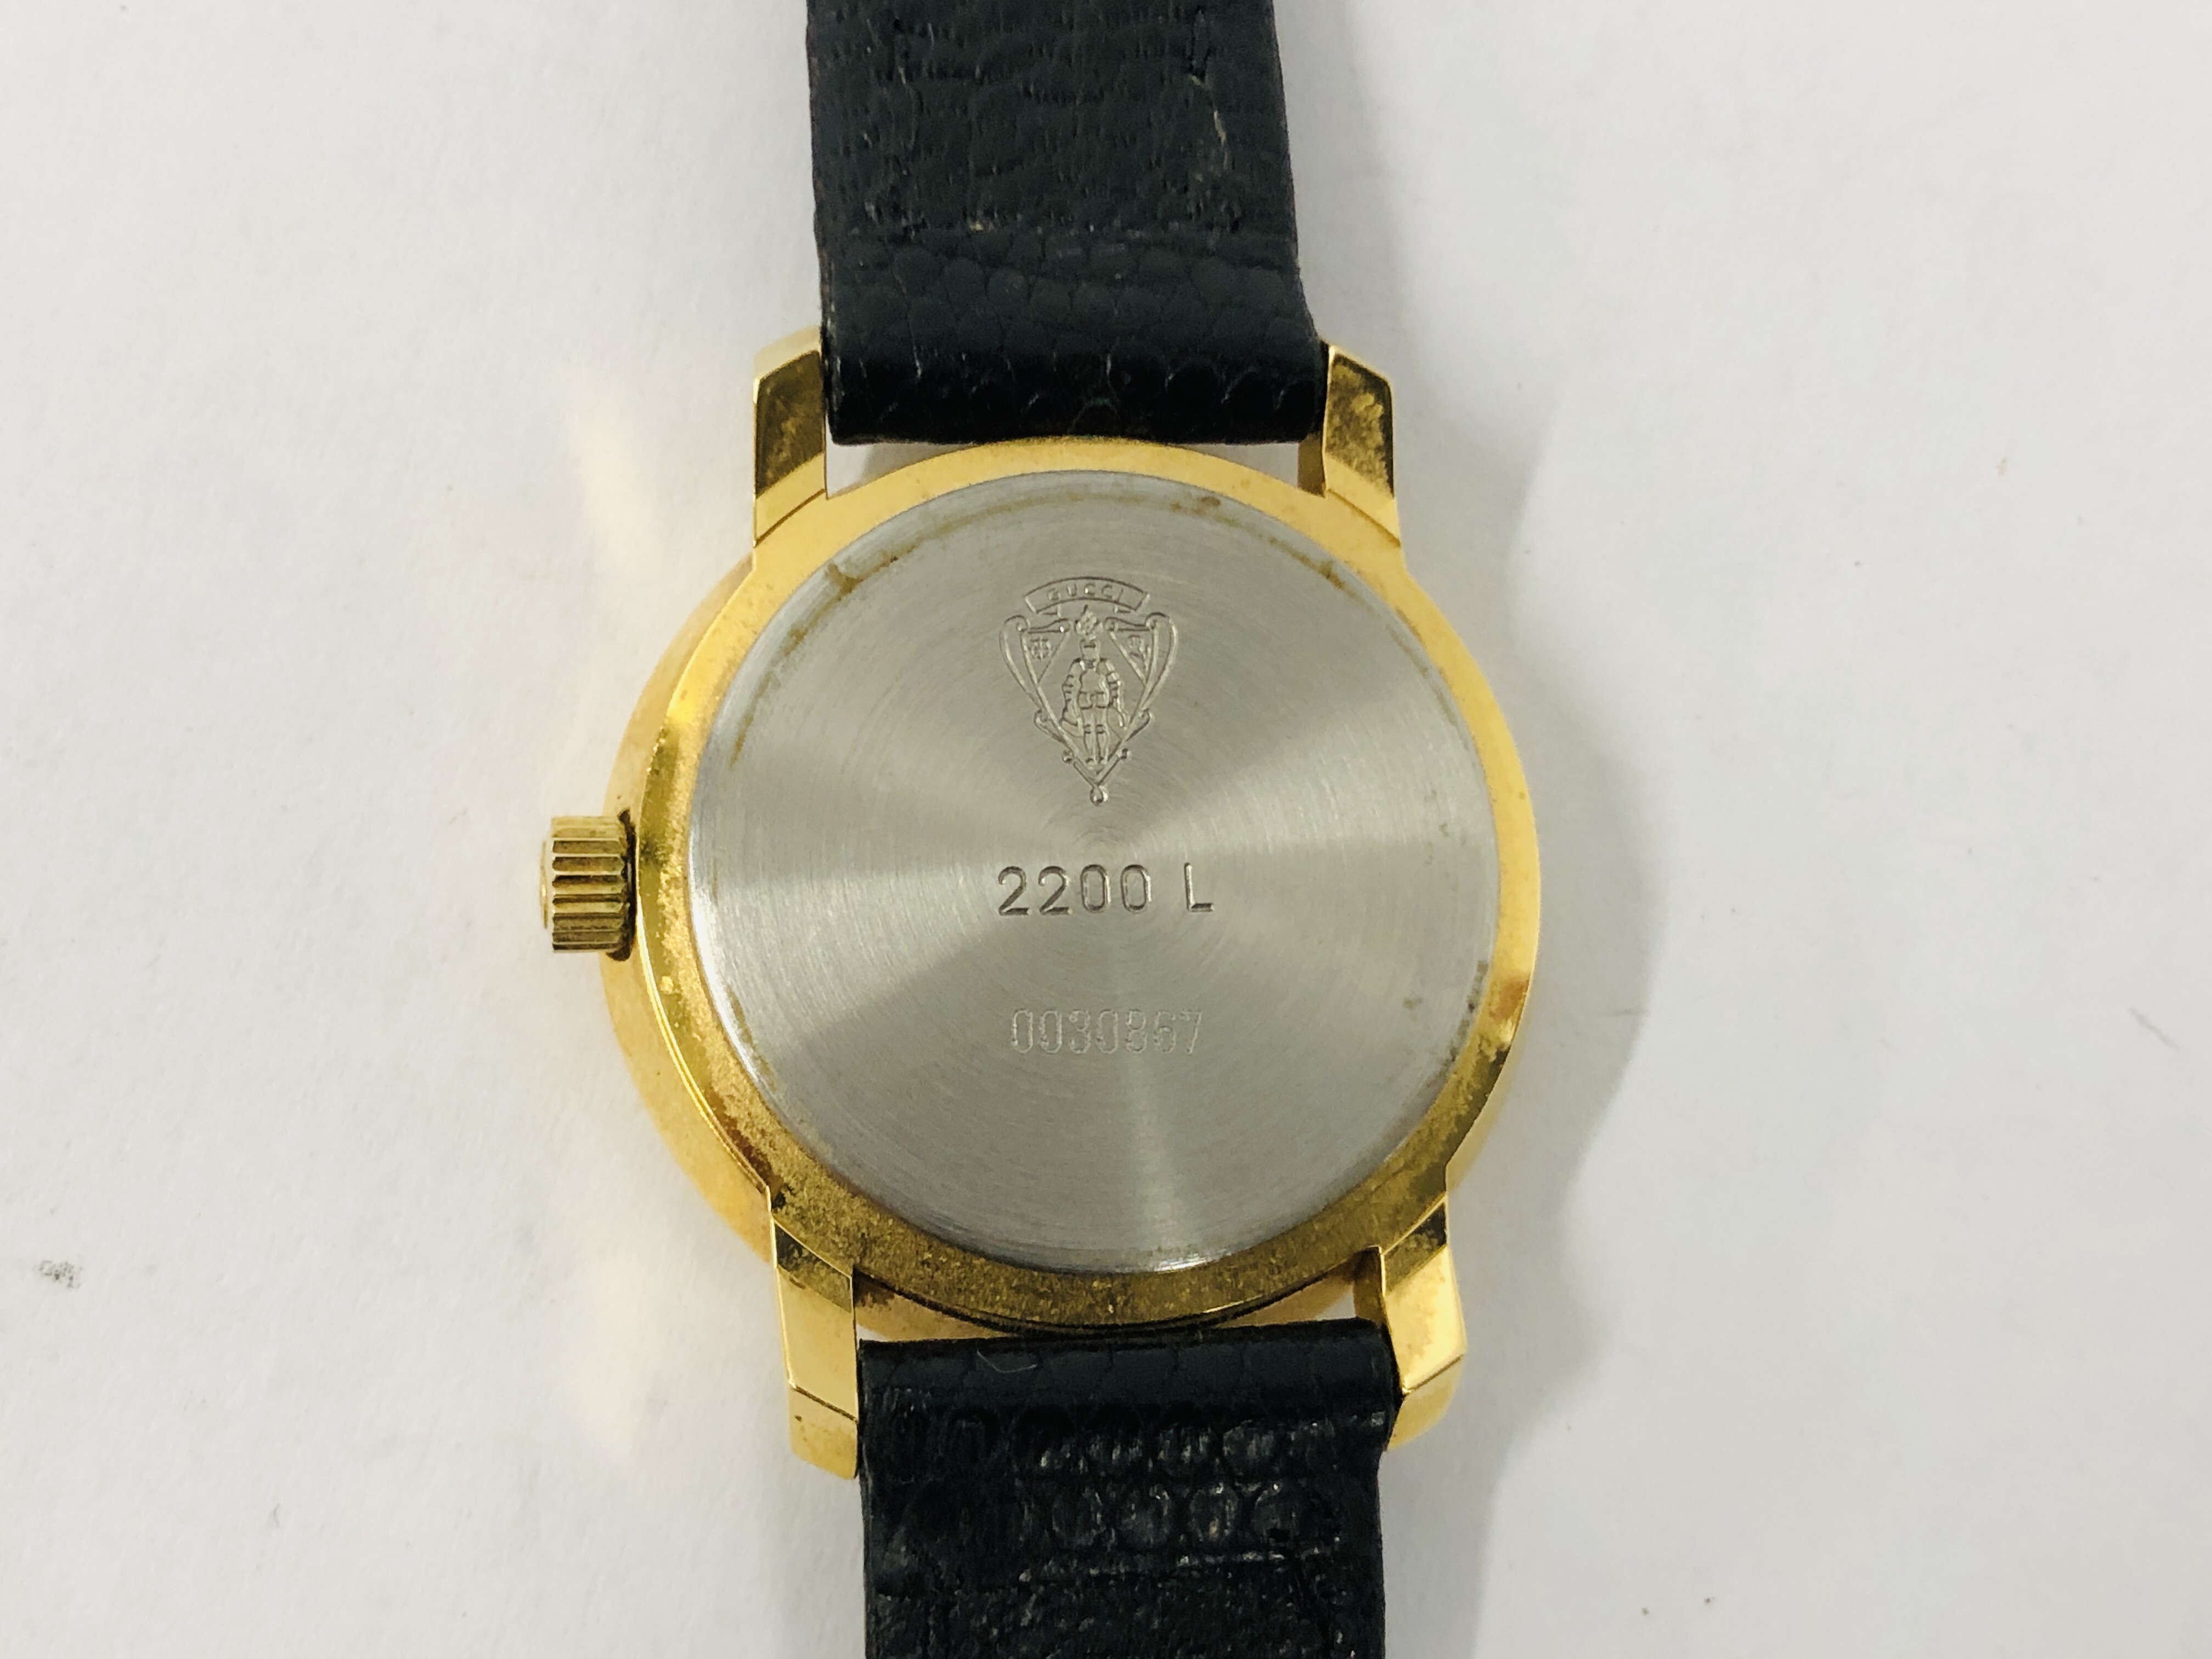 LADIES WRIST WATCH MARKED GUCCI MODEL NO. 2200L SERIAL NO. - Image 9 of 16